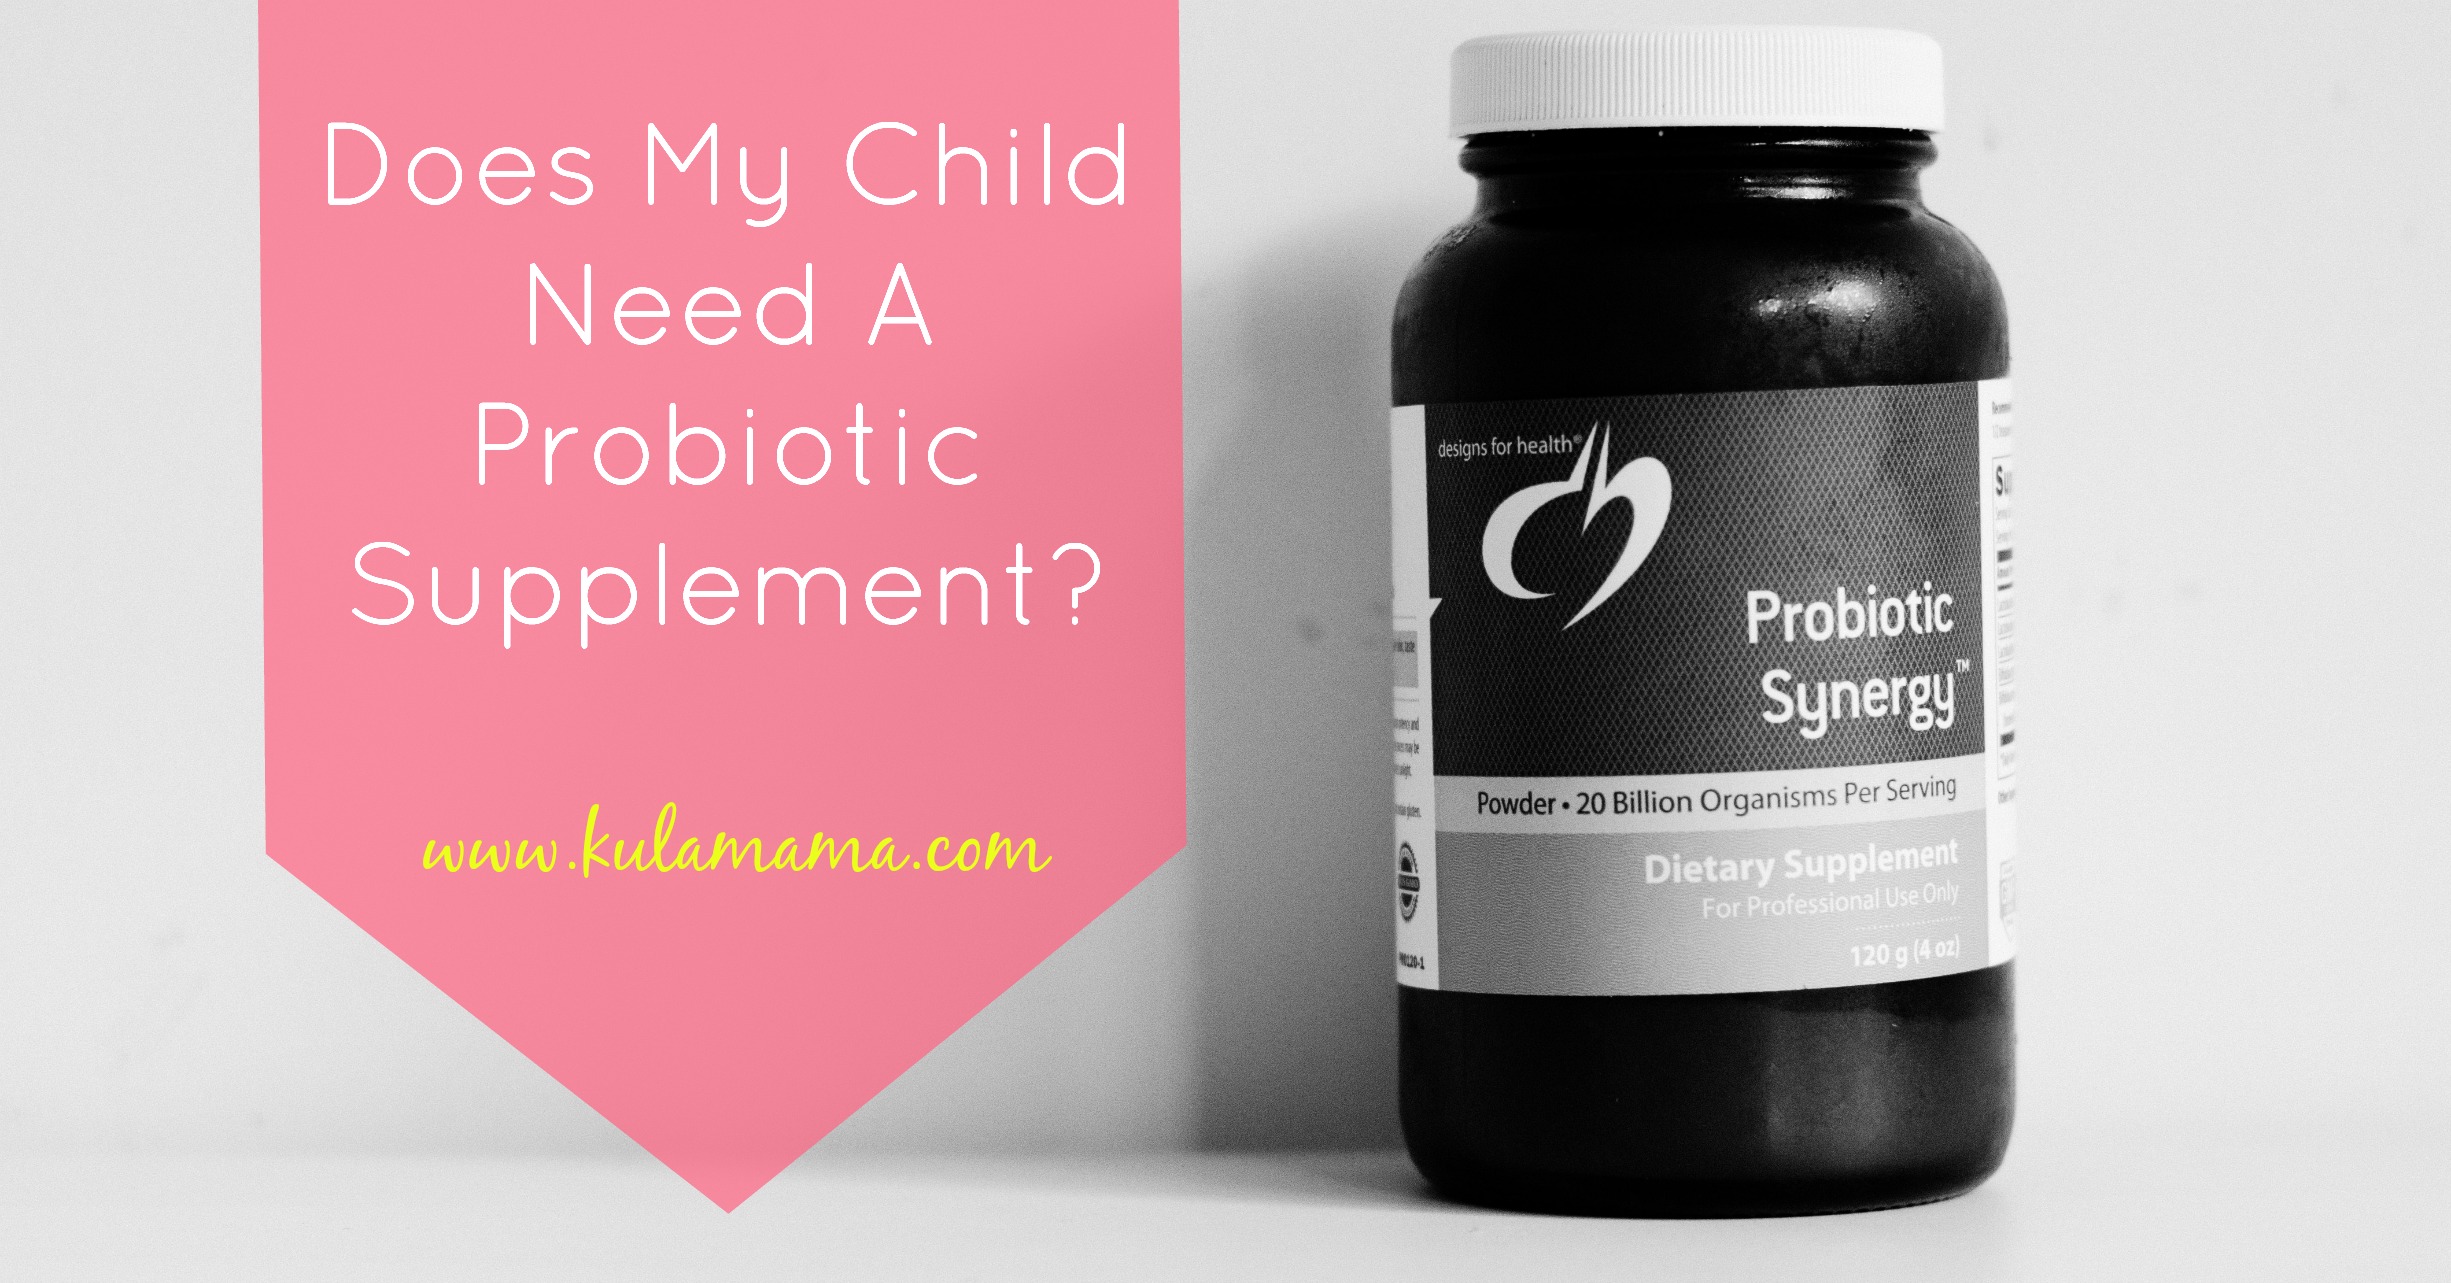 Does My Child Need a Probiotic Supplement?